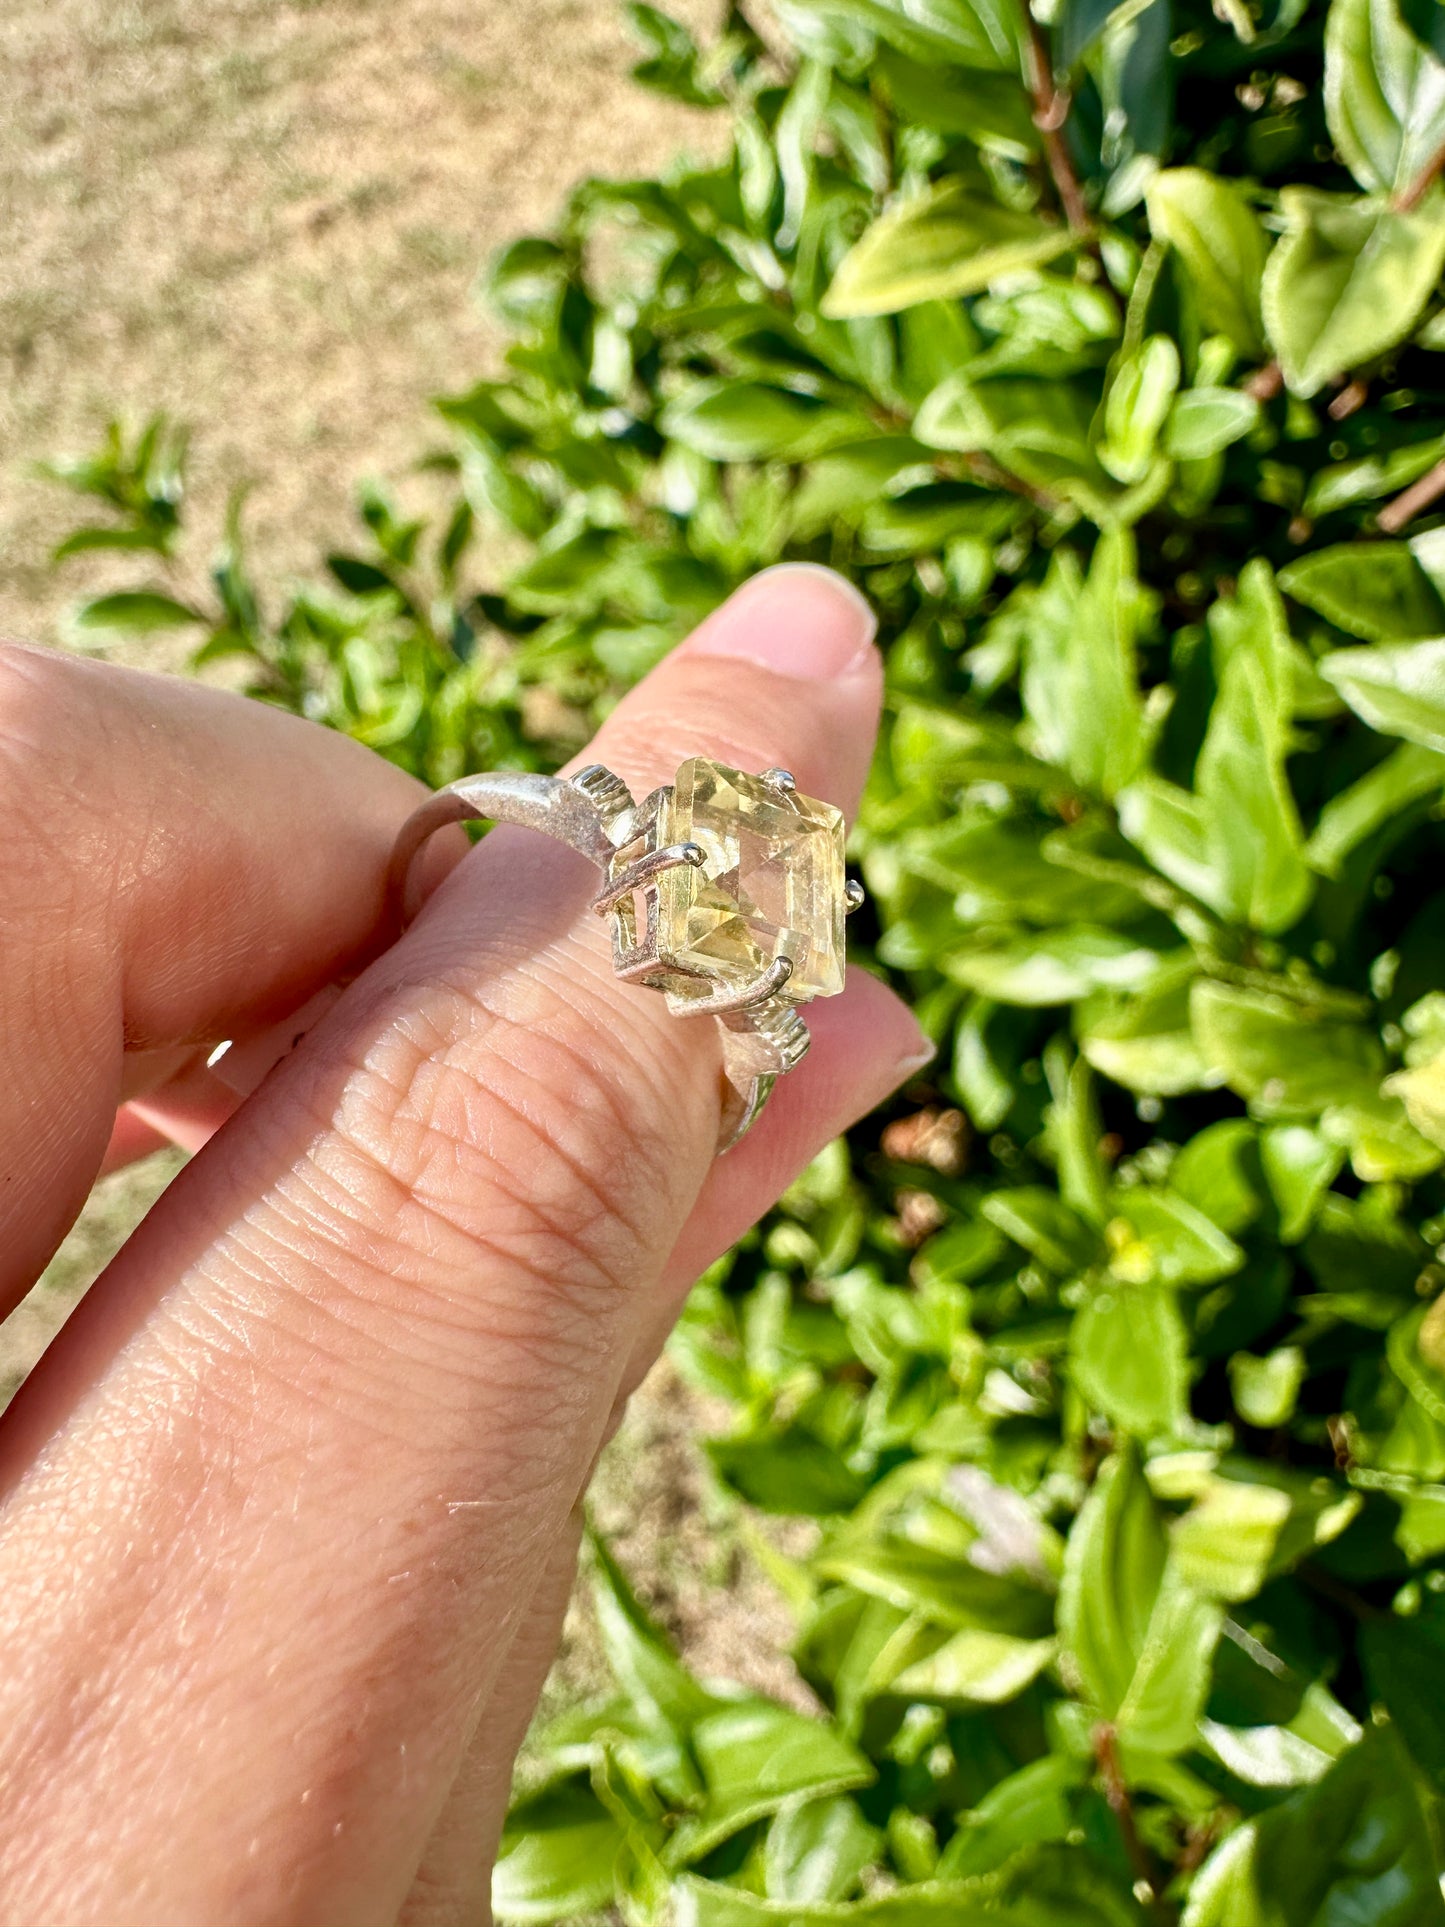 Citrine Sterling Silver Ring Size 9 - Elegant Jewelry for Prosperity and Joy, Perfect for Enhancing Positive Energy and Personal Style